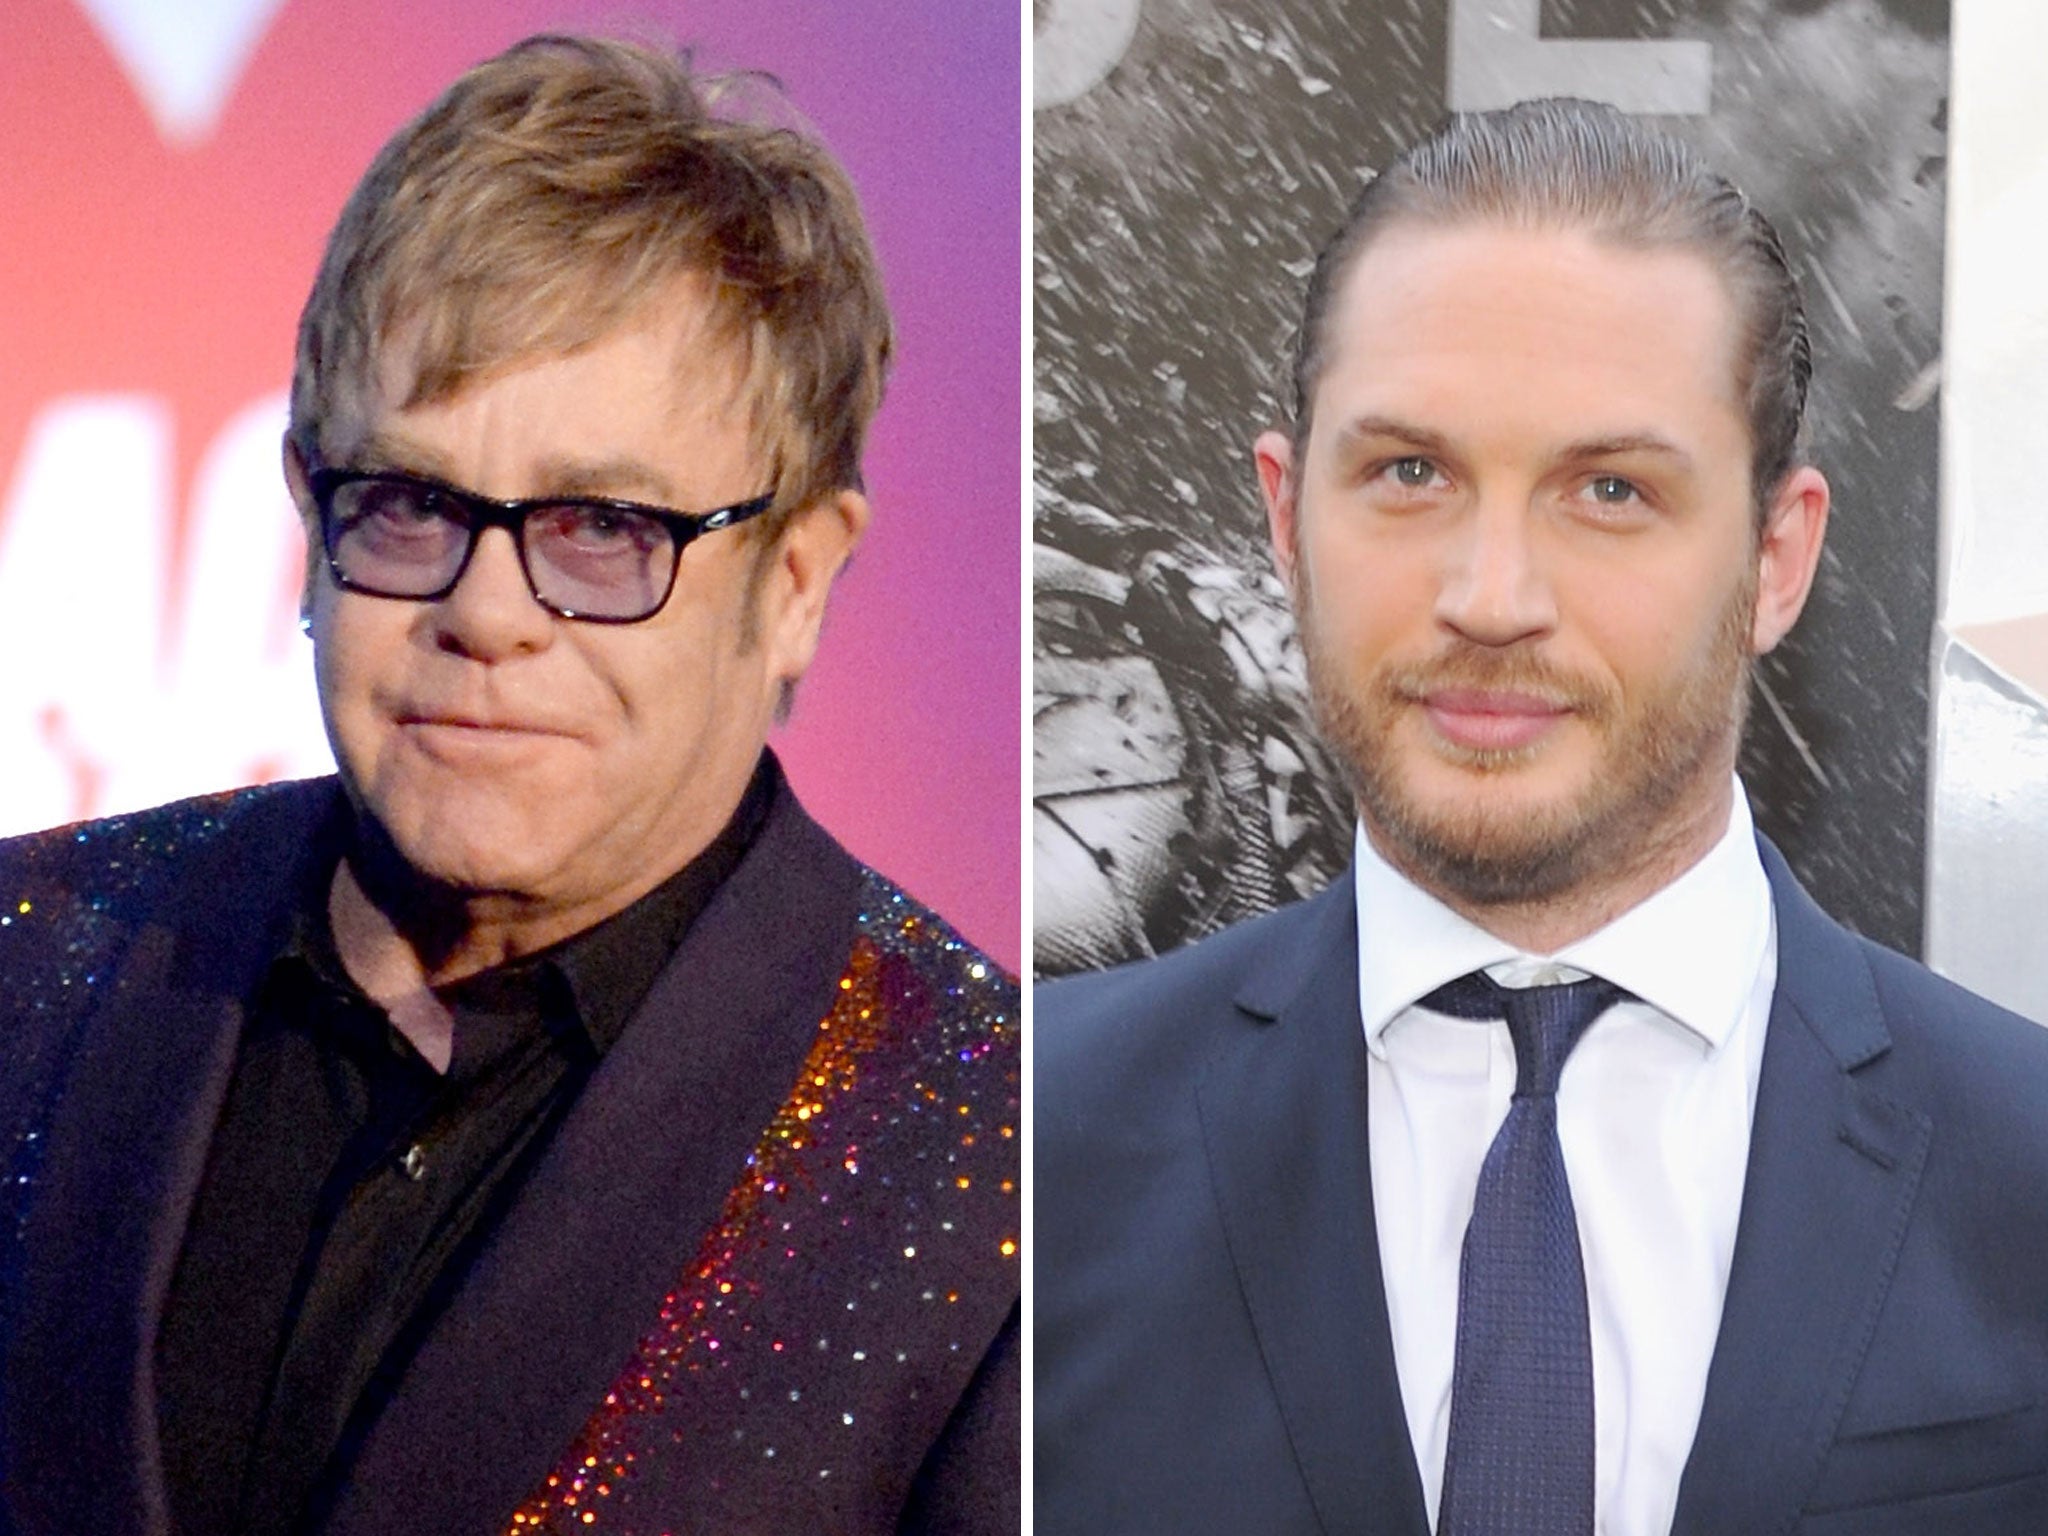 Reports suggest that rugged movie tough-guy Tom Hardy is a top contender to play Sir Elton in Rocketman